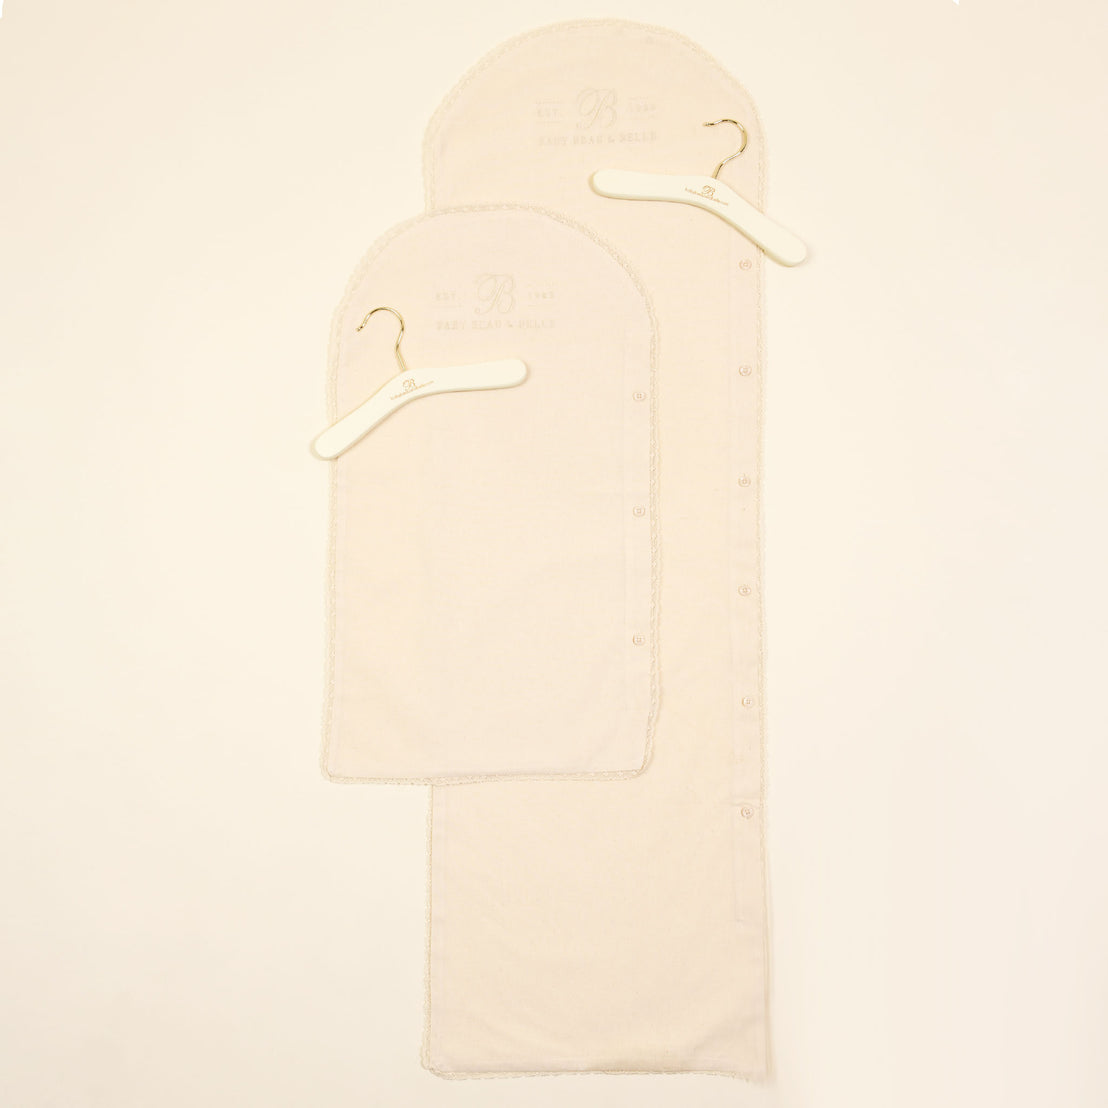 Two beige Muslin Keepsake Garment Bag covers with white hangers on a light background, featuring visible button details and labels at the top, ideal for baptism or christening attire.